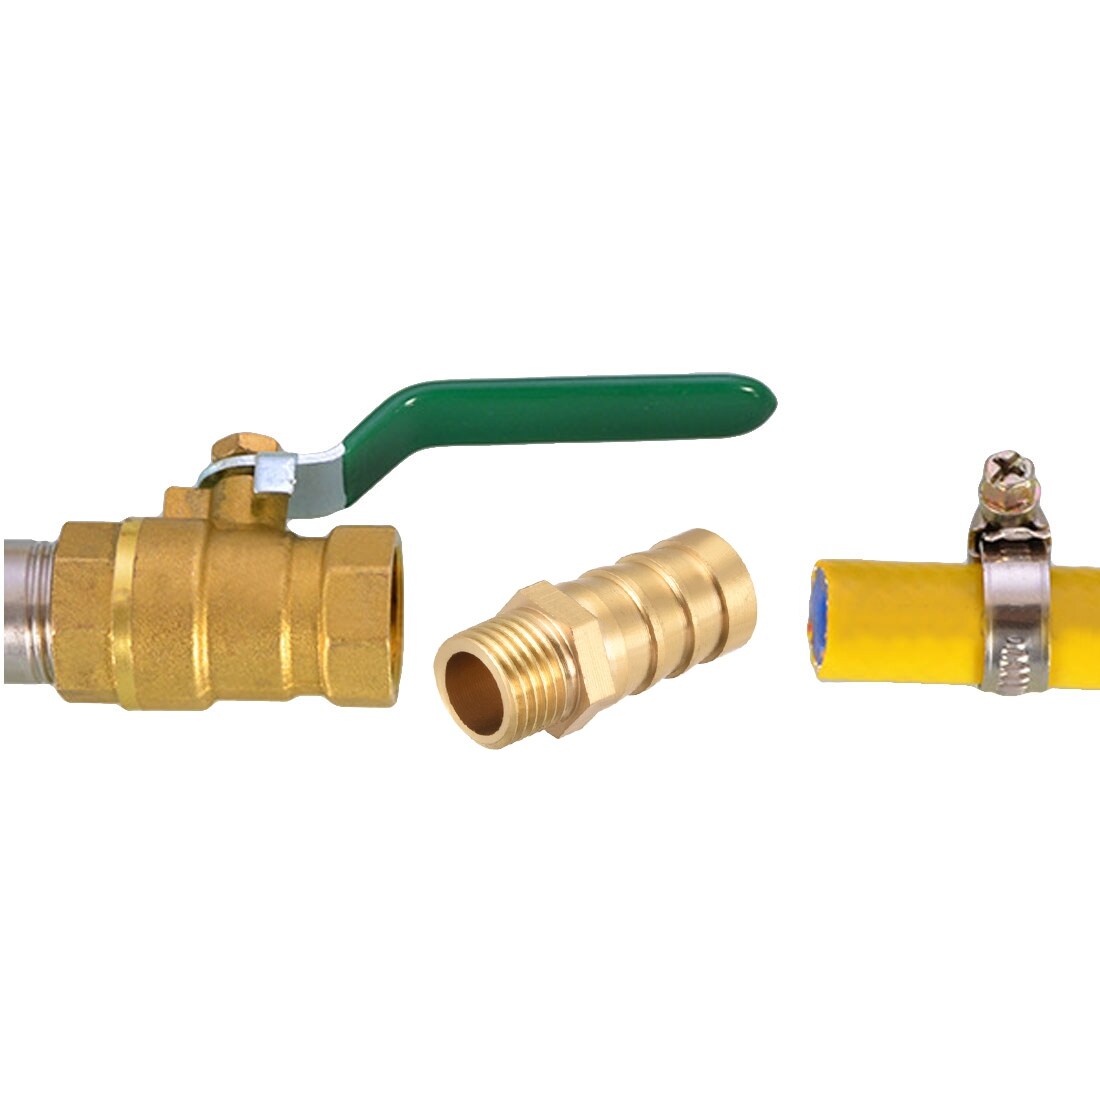 Brass Hose Barb Fitting,Connector,16mm Barb x G3/8 Male Pipe Adapter - Gold Tone - 3/8" G x 16mm